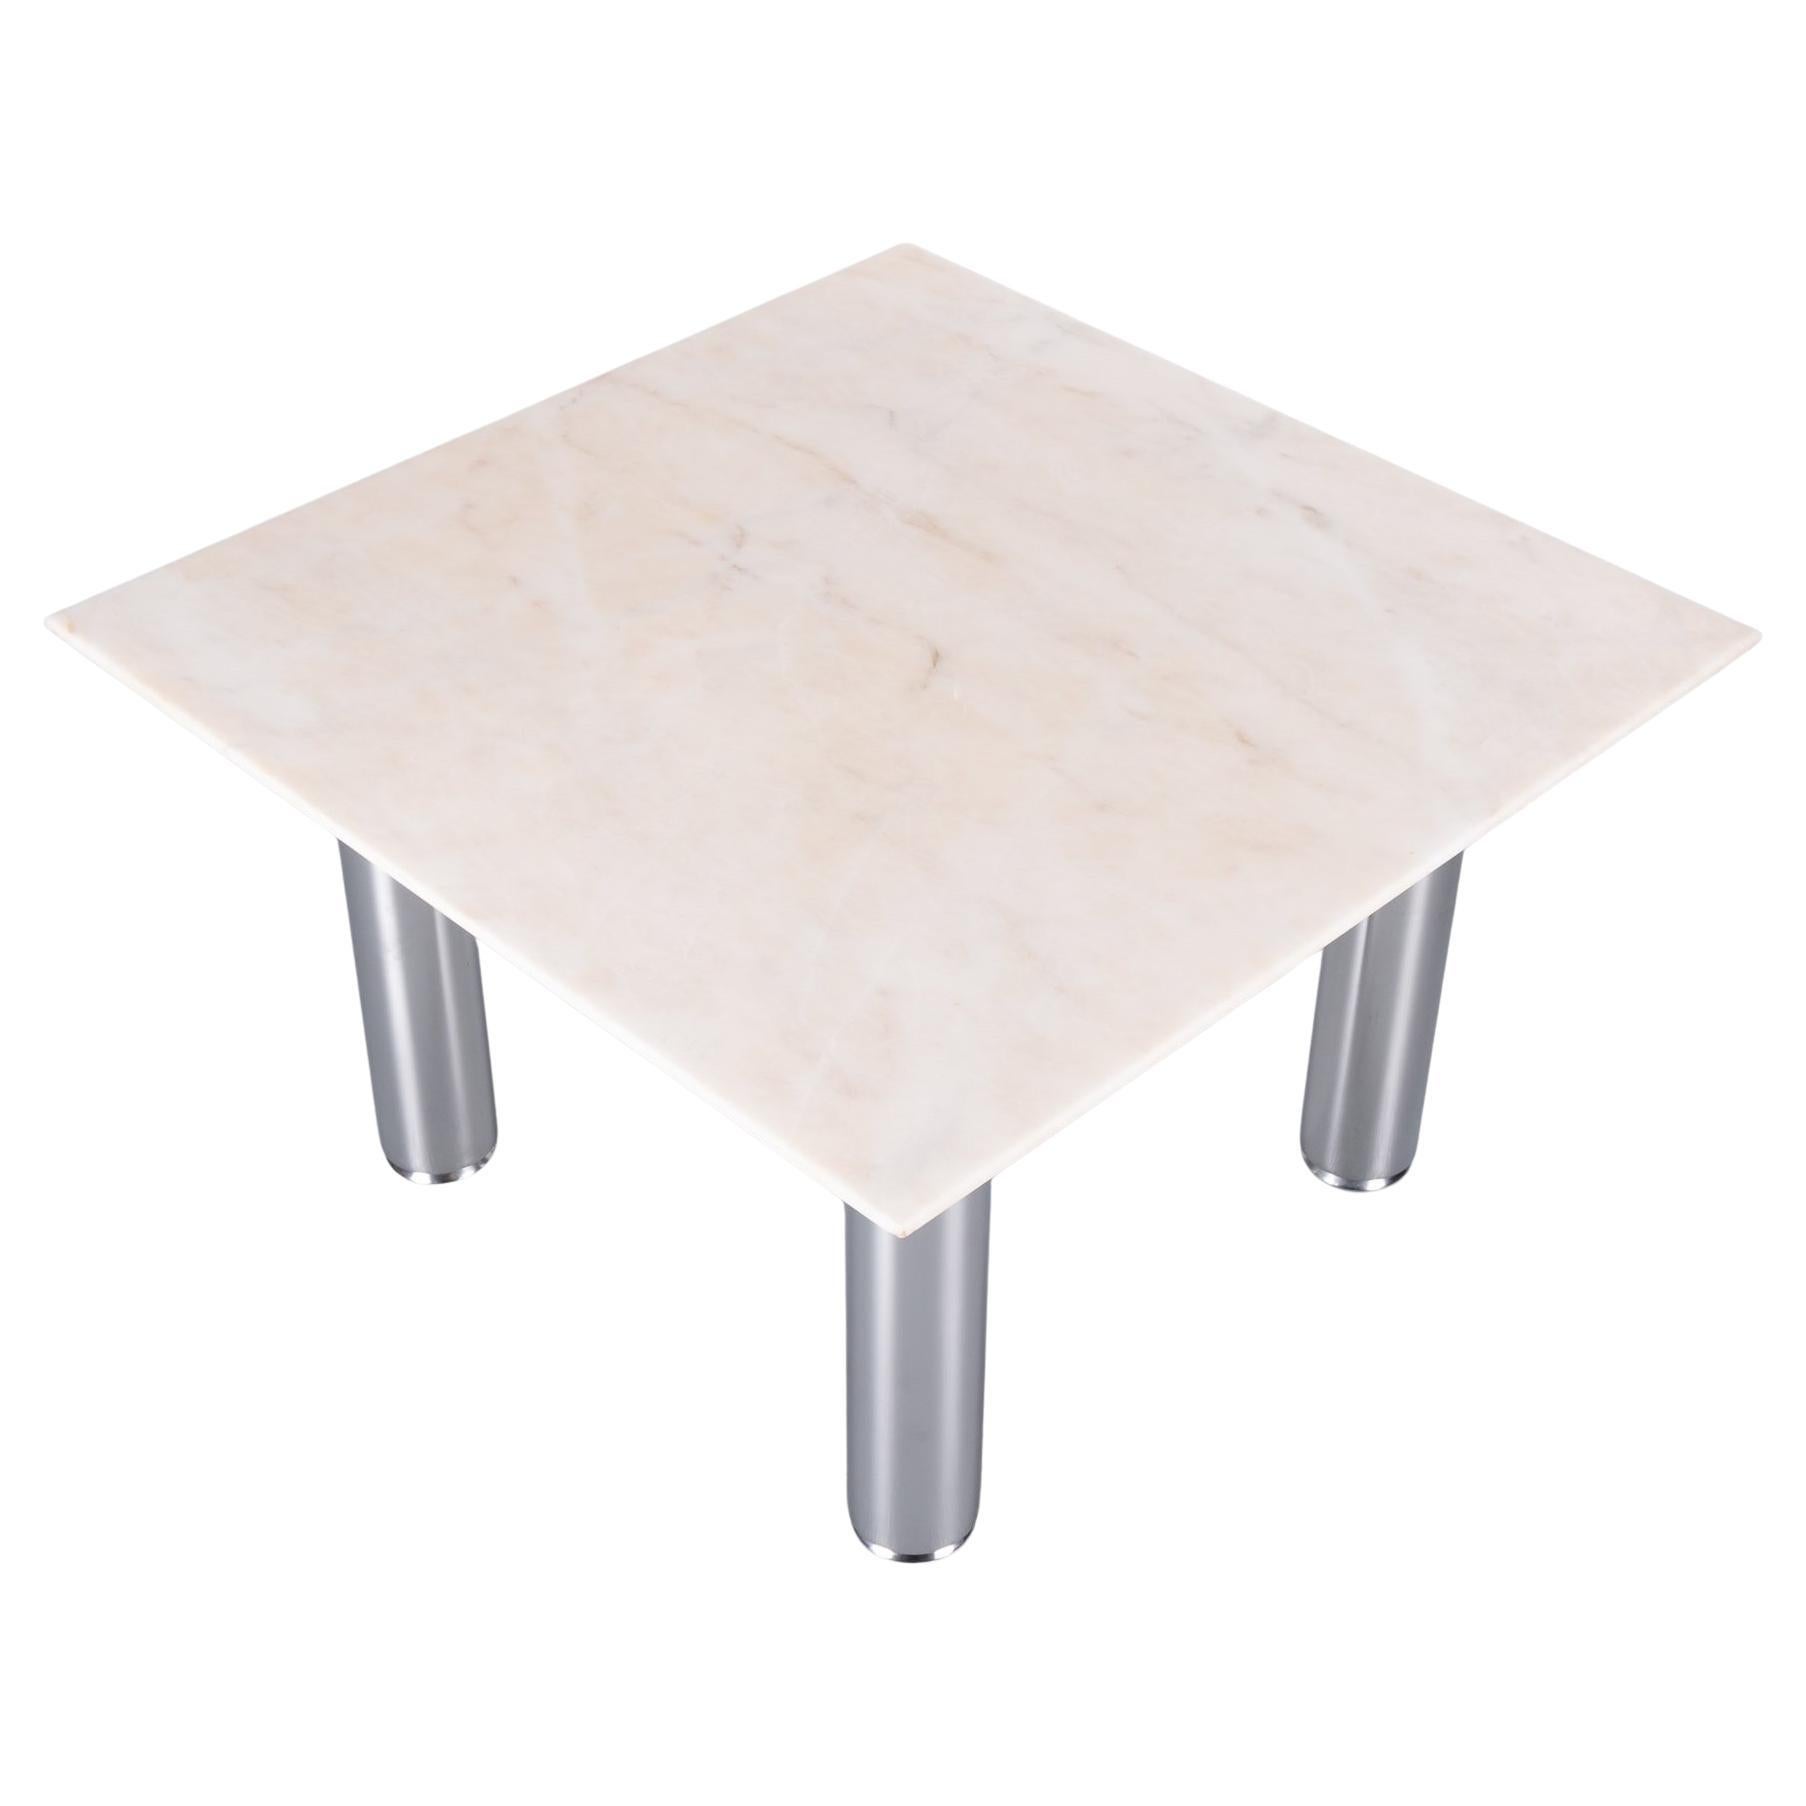 Very nice elegant square coffee table. Thin Marble top in a slightly pink color. Comes with robust brushed steel. legs .The legs are adjustable in height.  Very good quality table .
The thin marble top seems to float. Very good condition.  
Design